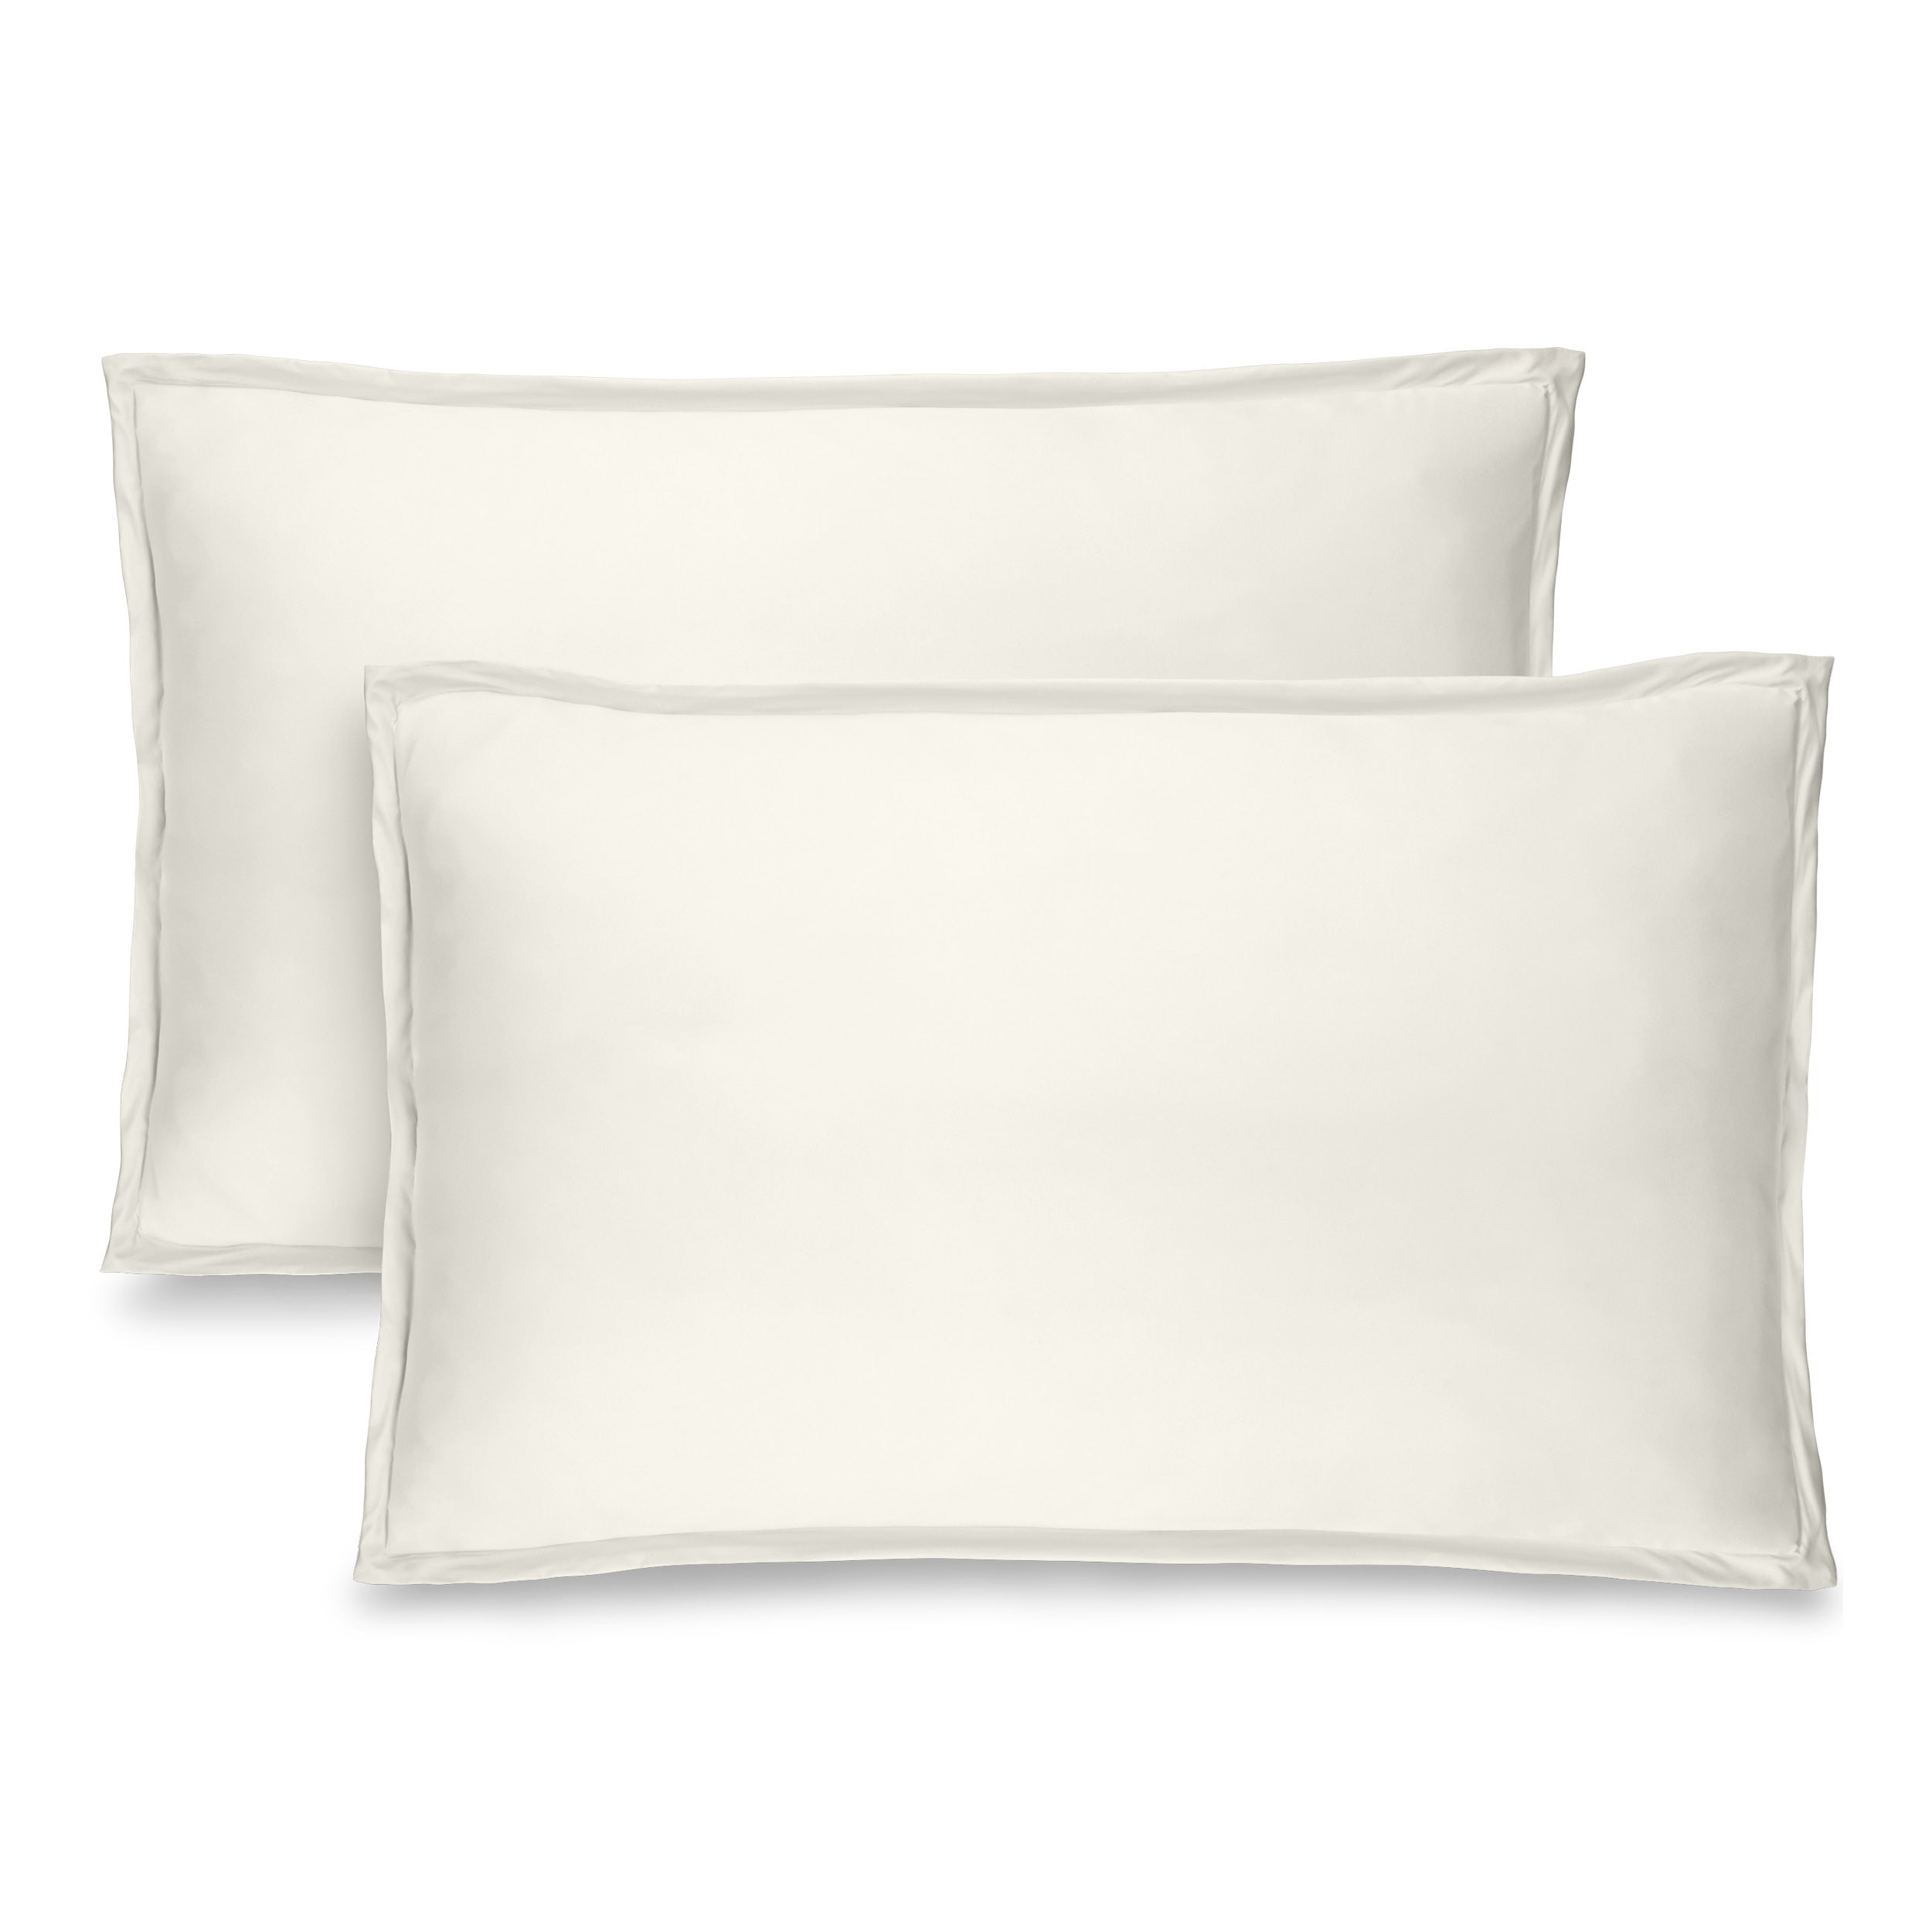 Two cream pillow shams on pillows standing up with one behind the other